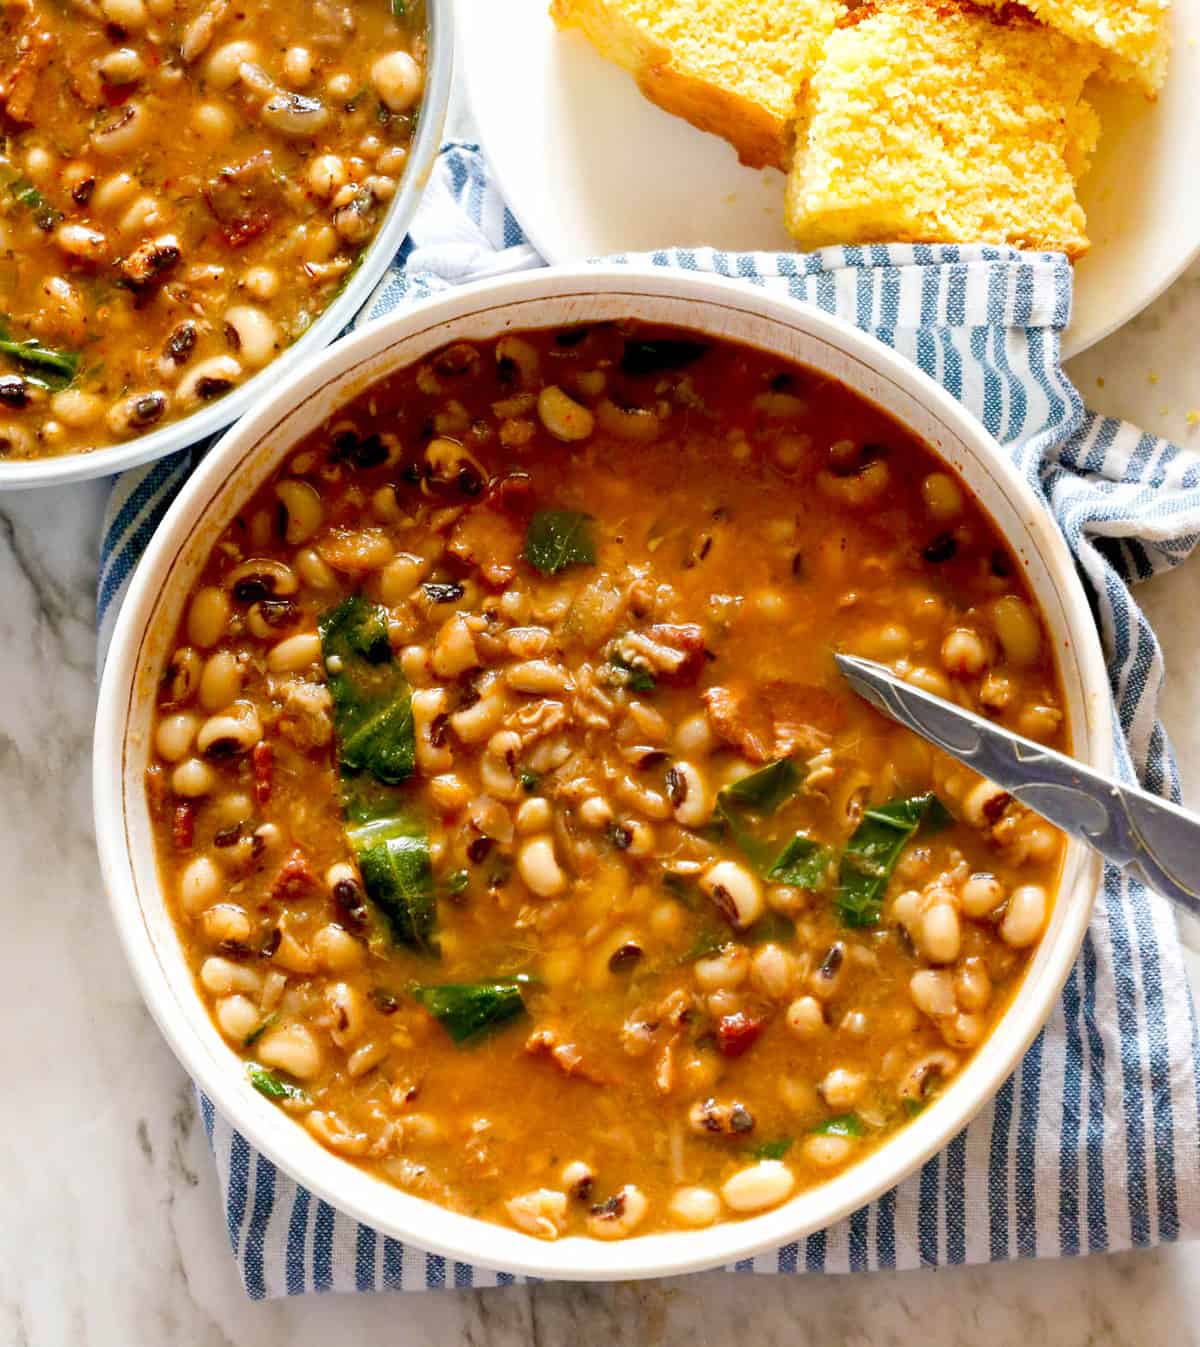 A hearty bowl of black-eyed pea soup